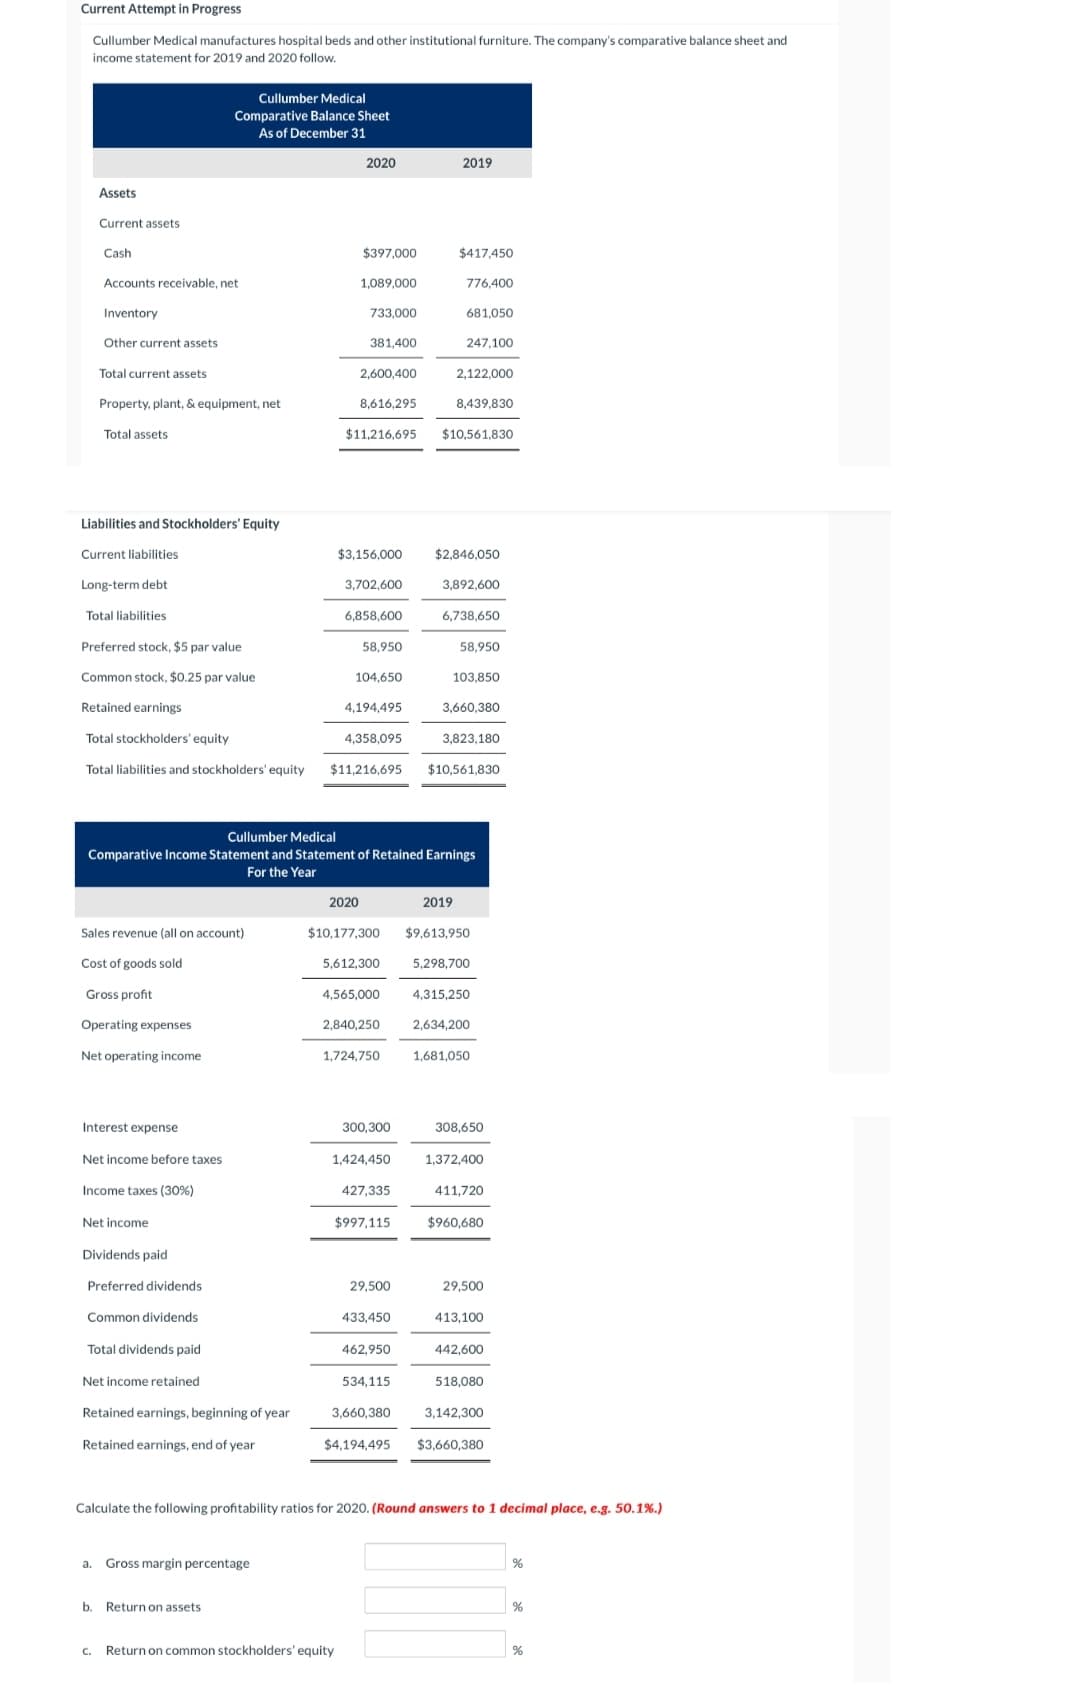 Current Attempt in Progress
Cullumber Medical manufactures hospital beds and other institutional furniture. The company's comparative balance sheet and
income statement for 2019 and 2020 follow.
Assets
Current assets
Cash
Accounts receivable, net
Inventory
Other current assets
Total current assets
Property, plant, & equipment, net
Total assets
Liabilities and Stockholders' Equity
Current liabilities
Long-term debt
Total liabilities
Sales revenue (all on account)
Cost of goods sold
Gross profit
Operating expenses
Net operating income
Cullumber Medical
Comparative Balance Sheet
As of December 31
Interest expense
Net income before taxes
Income taxes (30%)
Net income
Dividends paid
Preferred dividends
Common dividends
Total dividends paid.
Net income retained
Retained earnings, beginning of year
Retained earnings, end of year
a. Gross margin percentage
b. Return on assets
2020
$397,000
1,089,000
733,000
381,400
2,600,400
8,616,295
Preferred stock, $5 par value
Common stock, $0.25 par value
Retained earnings
Total stockholders' equity
Total liabilities and stockholders' equity $11,216,695 $10,561,830
2020
$3,156,000
3,702,600
6,858,600
C. Return on common stockholders' equity
8,439,830
$11,216,695 $10.561.830
58,950
104,650
4,194,495
4.358,095
Cullumber Medical
Comparative Income Statement and Statement of Retained Earnings
For the Year
$10,177,300
5,612,300
300,300
1,424,450
427,335
$997,115
2019
$417,450
776,400
433,450
462,950
681,050
534,115
247,100
2,122,000
$2,846,050
3,892,600
6,738,650
2019
58,950
103,850
4,565,000 4.315,250
2,840,250
2,634,200
1,724,750 1,681,050
3,660,380
3,823,180
$9,613,950
5,298,700
308,650
1,372,400
411,720
$960,680
29,500
413,100
442,600
Calculate the following profitability ratios for 2020. (Round answers to 1 decimal place, e.g. 50.1%.)
518,080
3,660,380 3,142,300
$4,194,495 $3,660,380
%
%
%